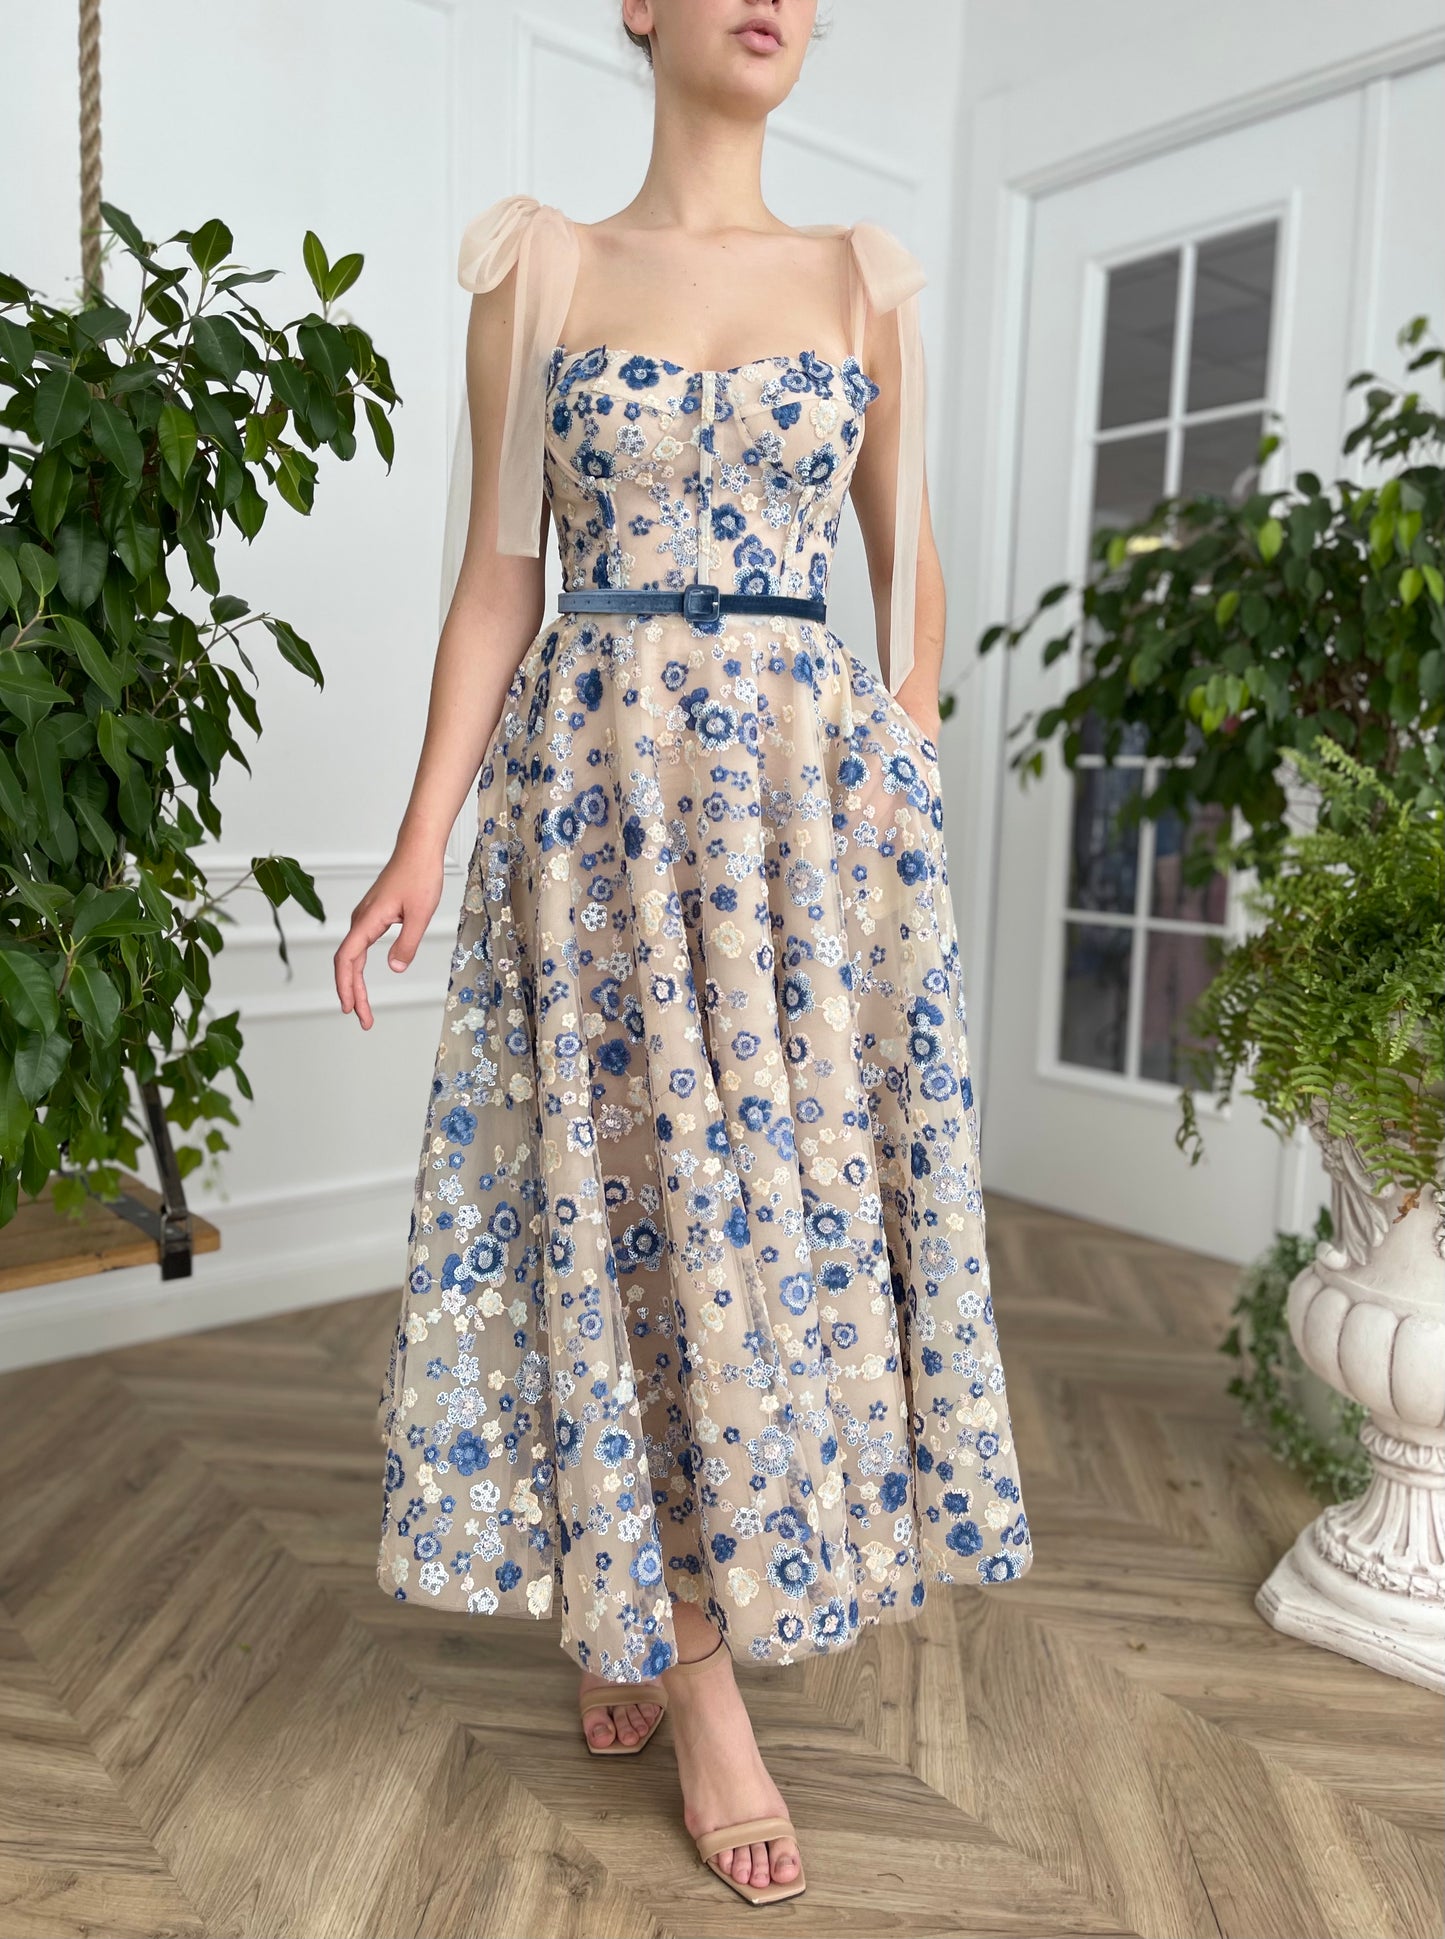 Beige midi dress with belt, printed flowers and bow straps